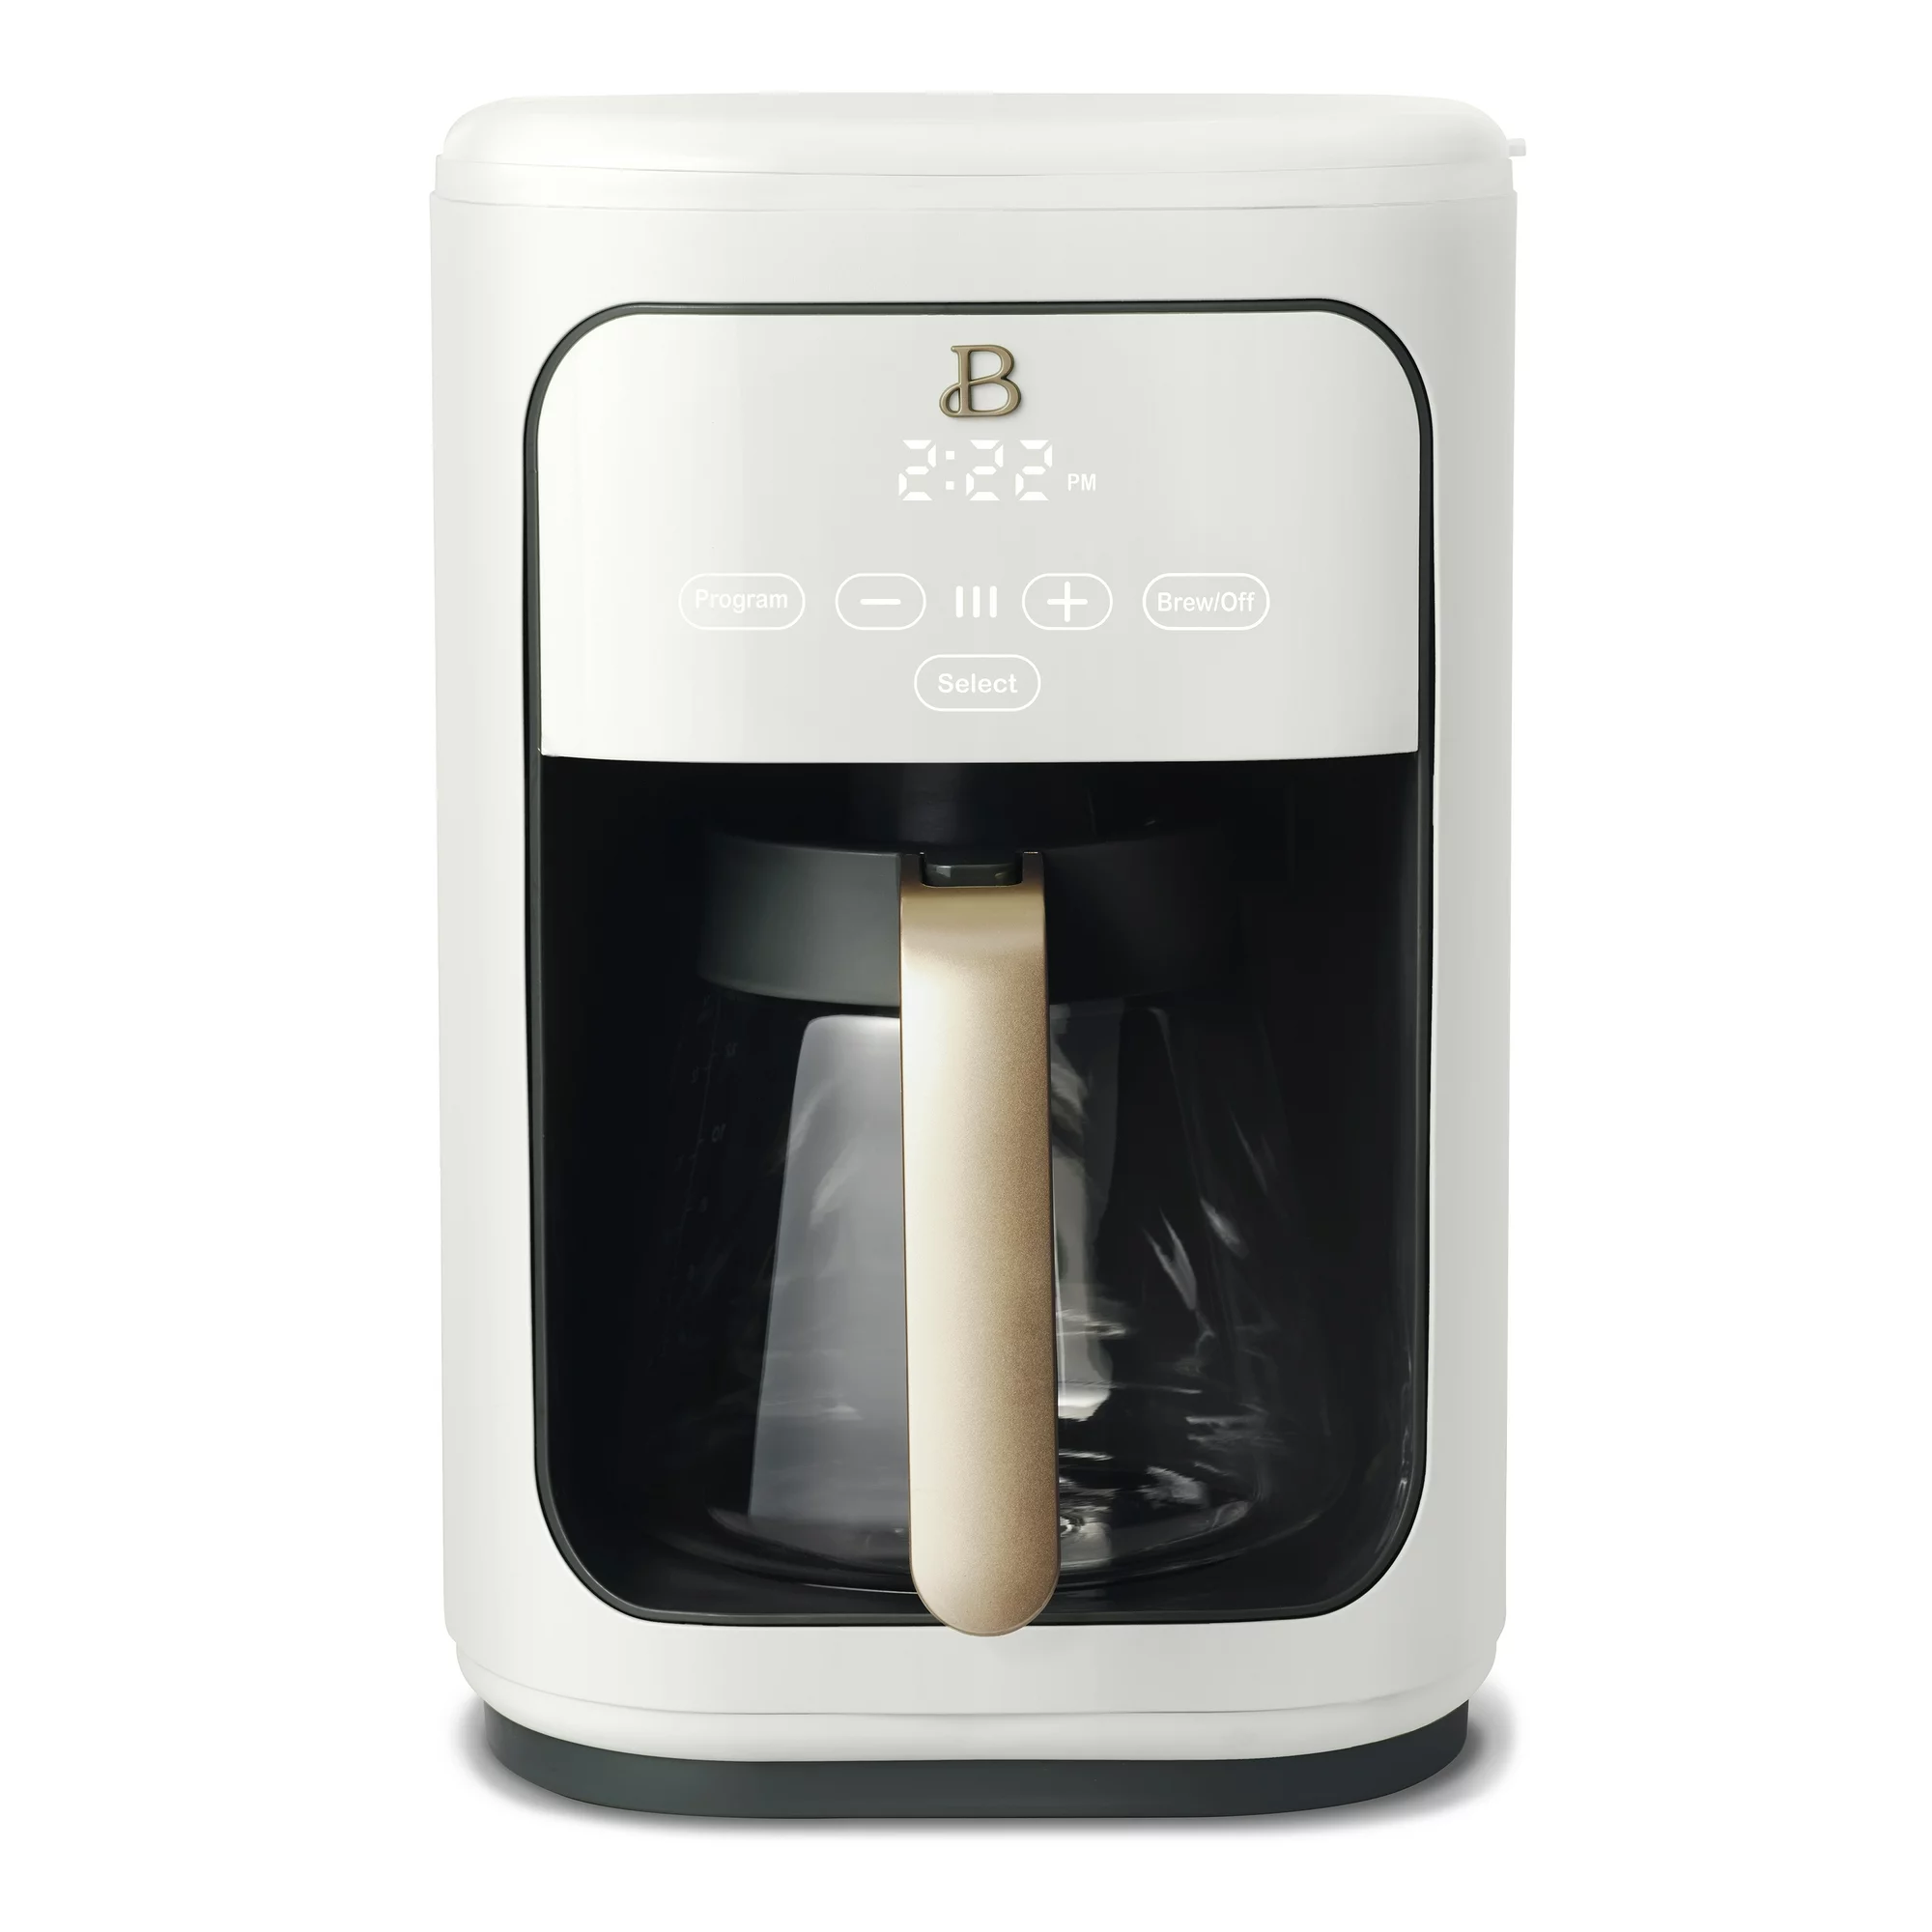 https://www.care.com/c/wp-content/uploads/sites/2/2022/10/Beautiful-14-Cup-Programmable-Drip-Coffee-Maker-with-Touch-Activated-Display-White-Icing-by-Drew-Barrymore_570419b0-a9c9-48b1-856c-f78033a70797.d653cb03e04db74af8eea4dc7c859488.webp